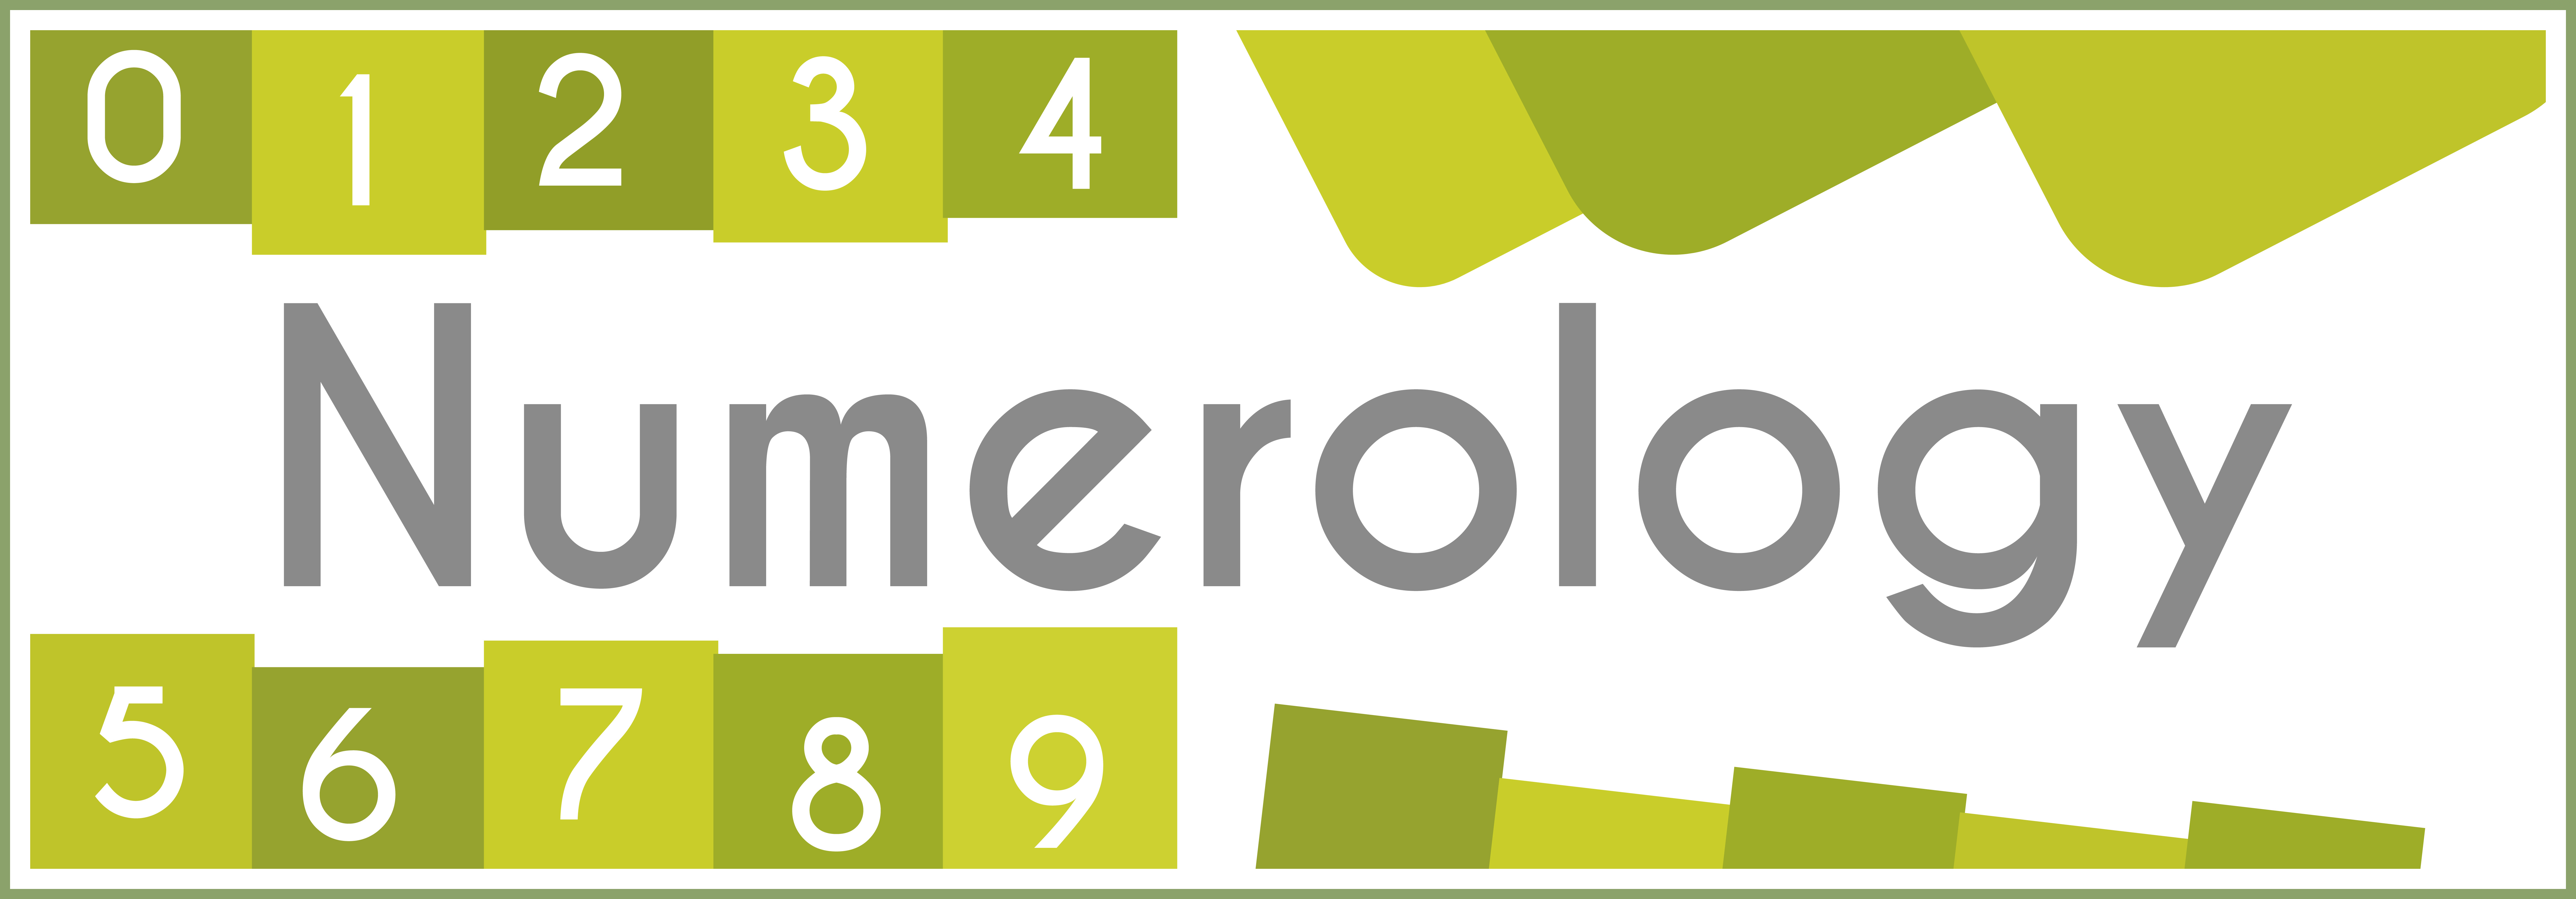 Numerology banner with numeral tiles from zero to 9